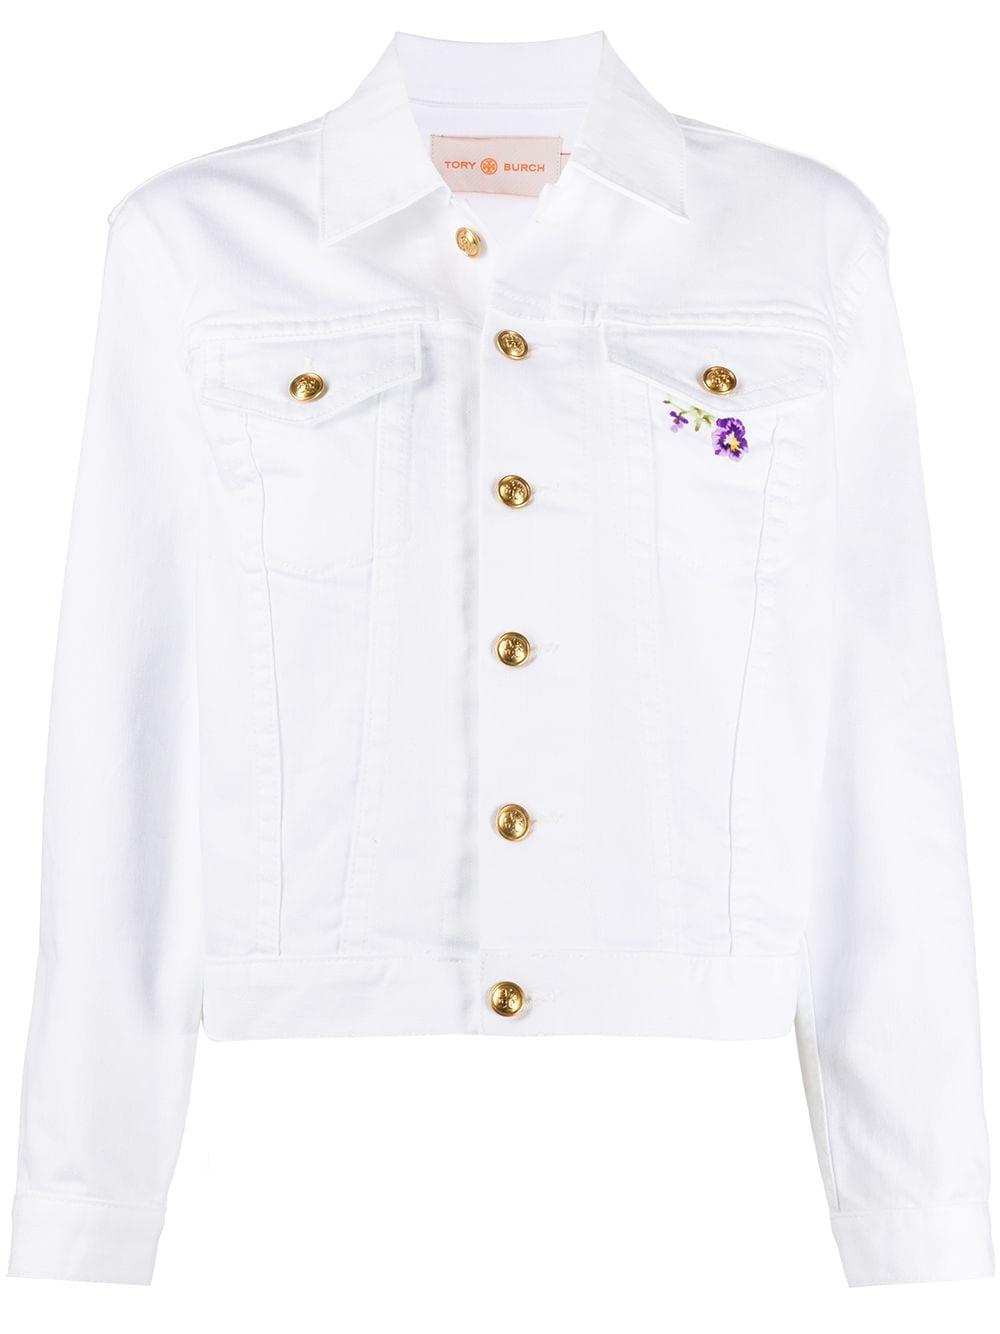 Tory Burch Embroidered Denim Jacket in White - Lyst